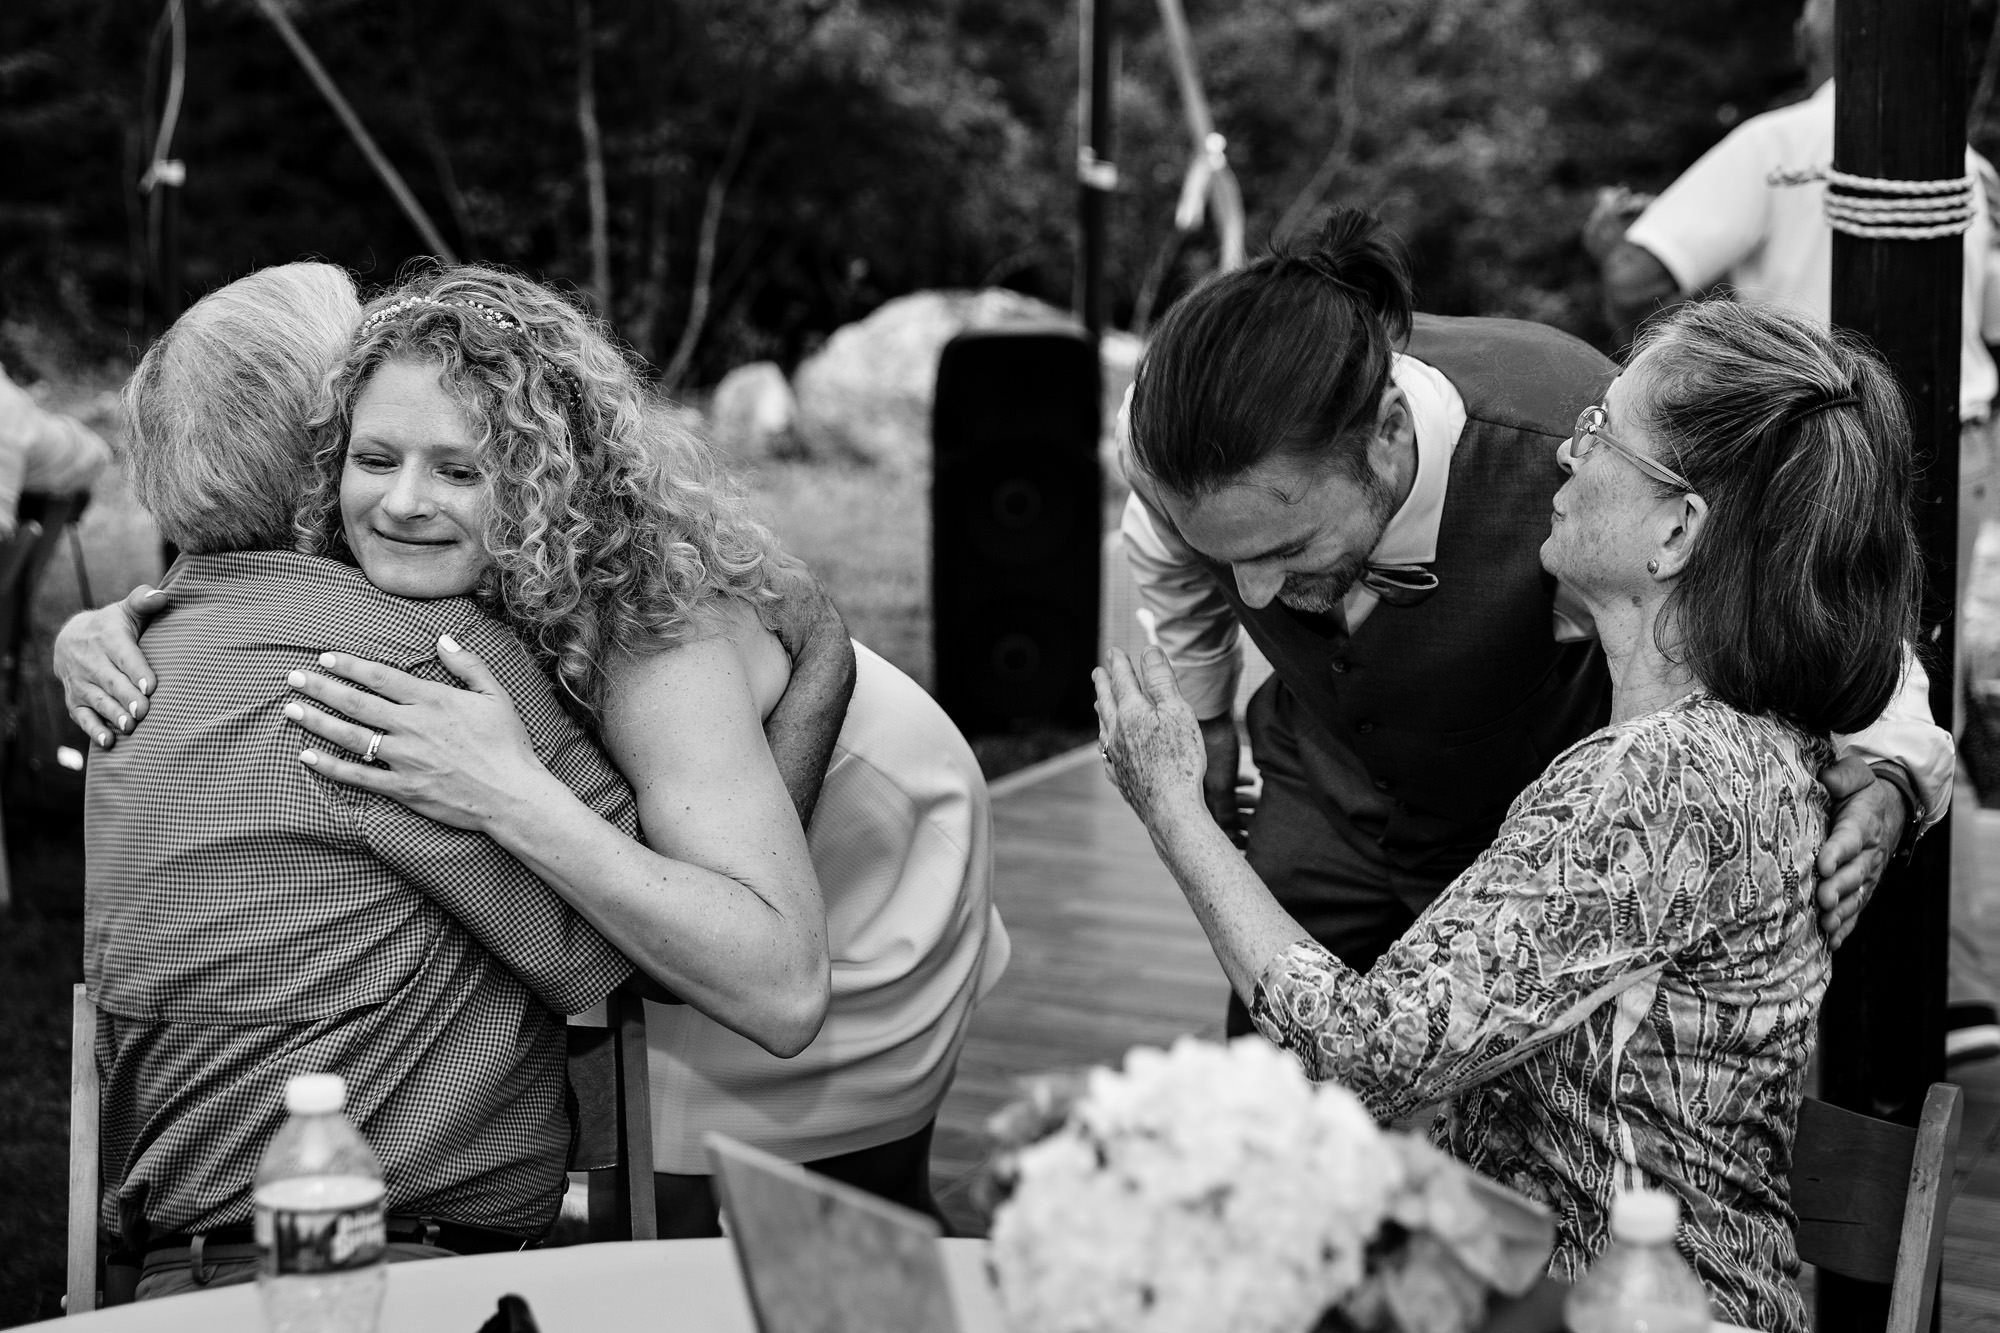 The bride and groom hug friends and family at their Poland Maine wedding